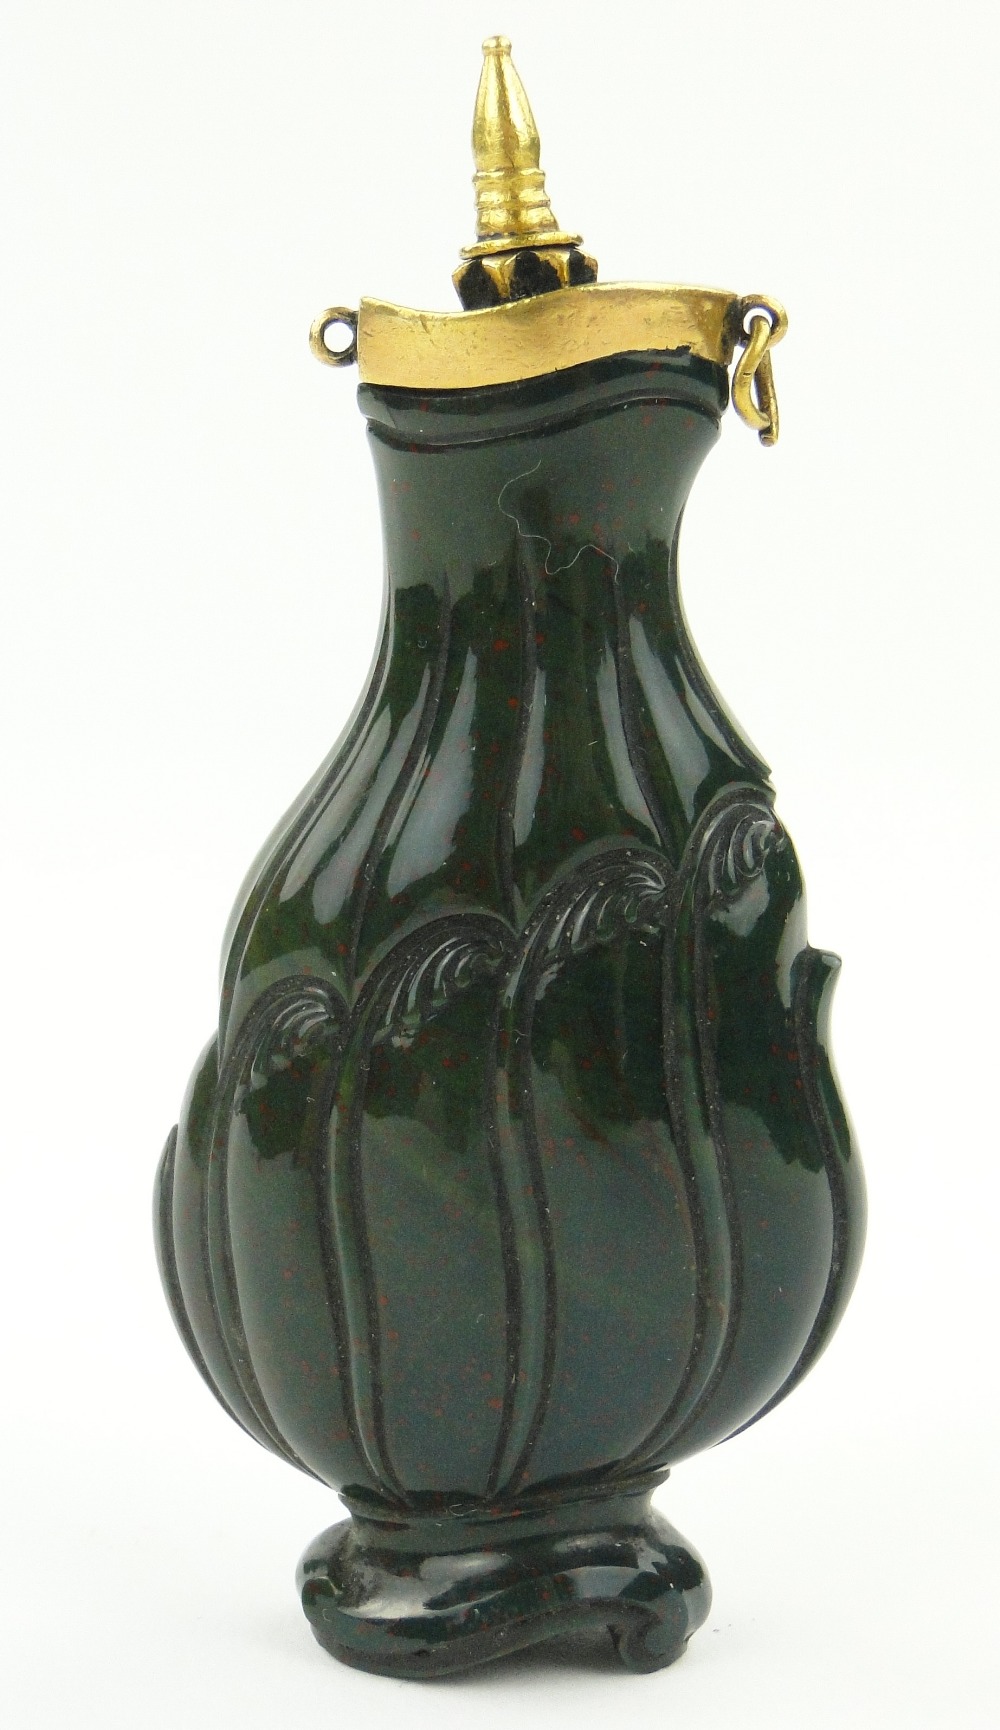 Antique Chinese carved bloodstone snuff bottle with unmarked gold mount and stopper, height 3".